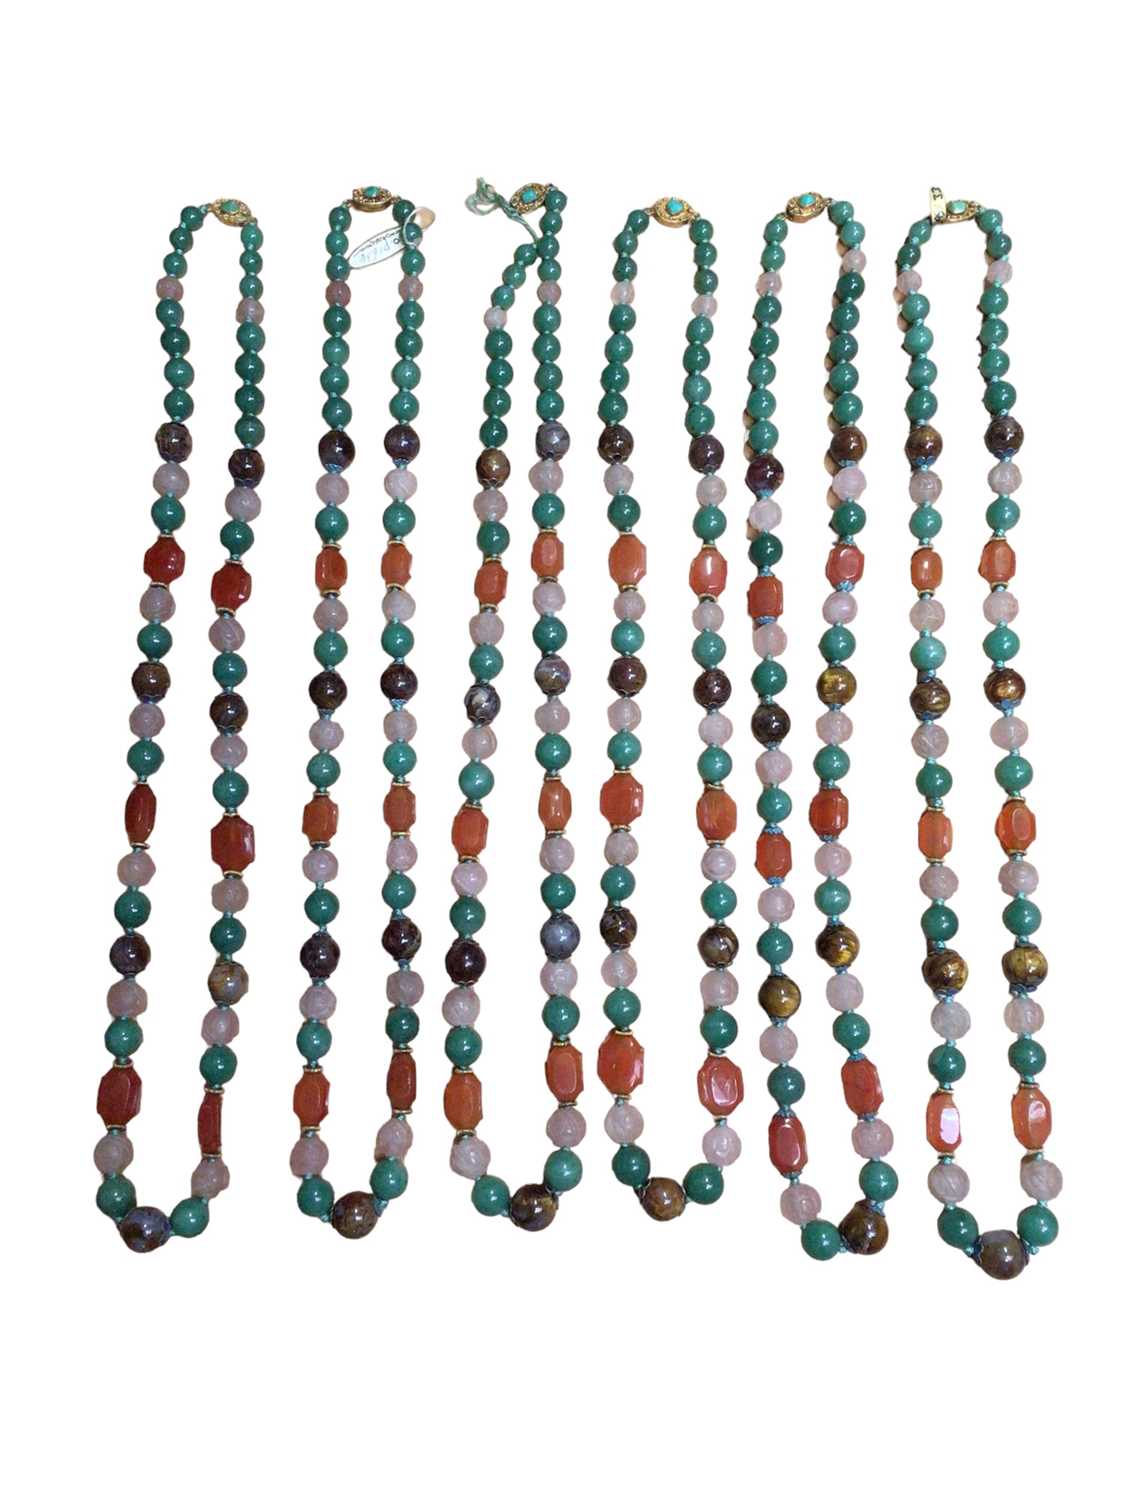 Lot 130 - Six Chinese green hard stone, carnelian and carved rose quartz bead necklaces with silver gilt claps set with a turquoise stone